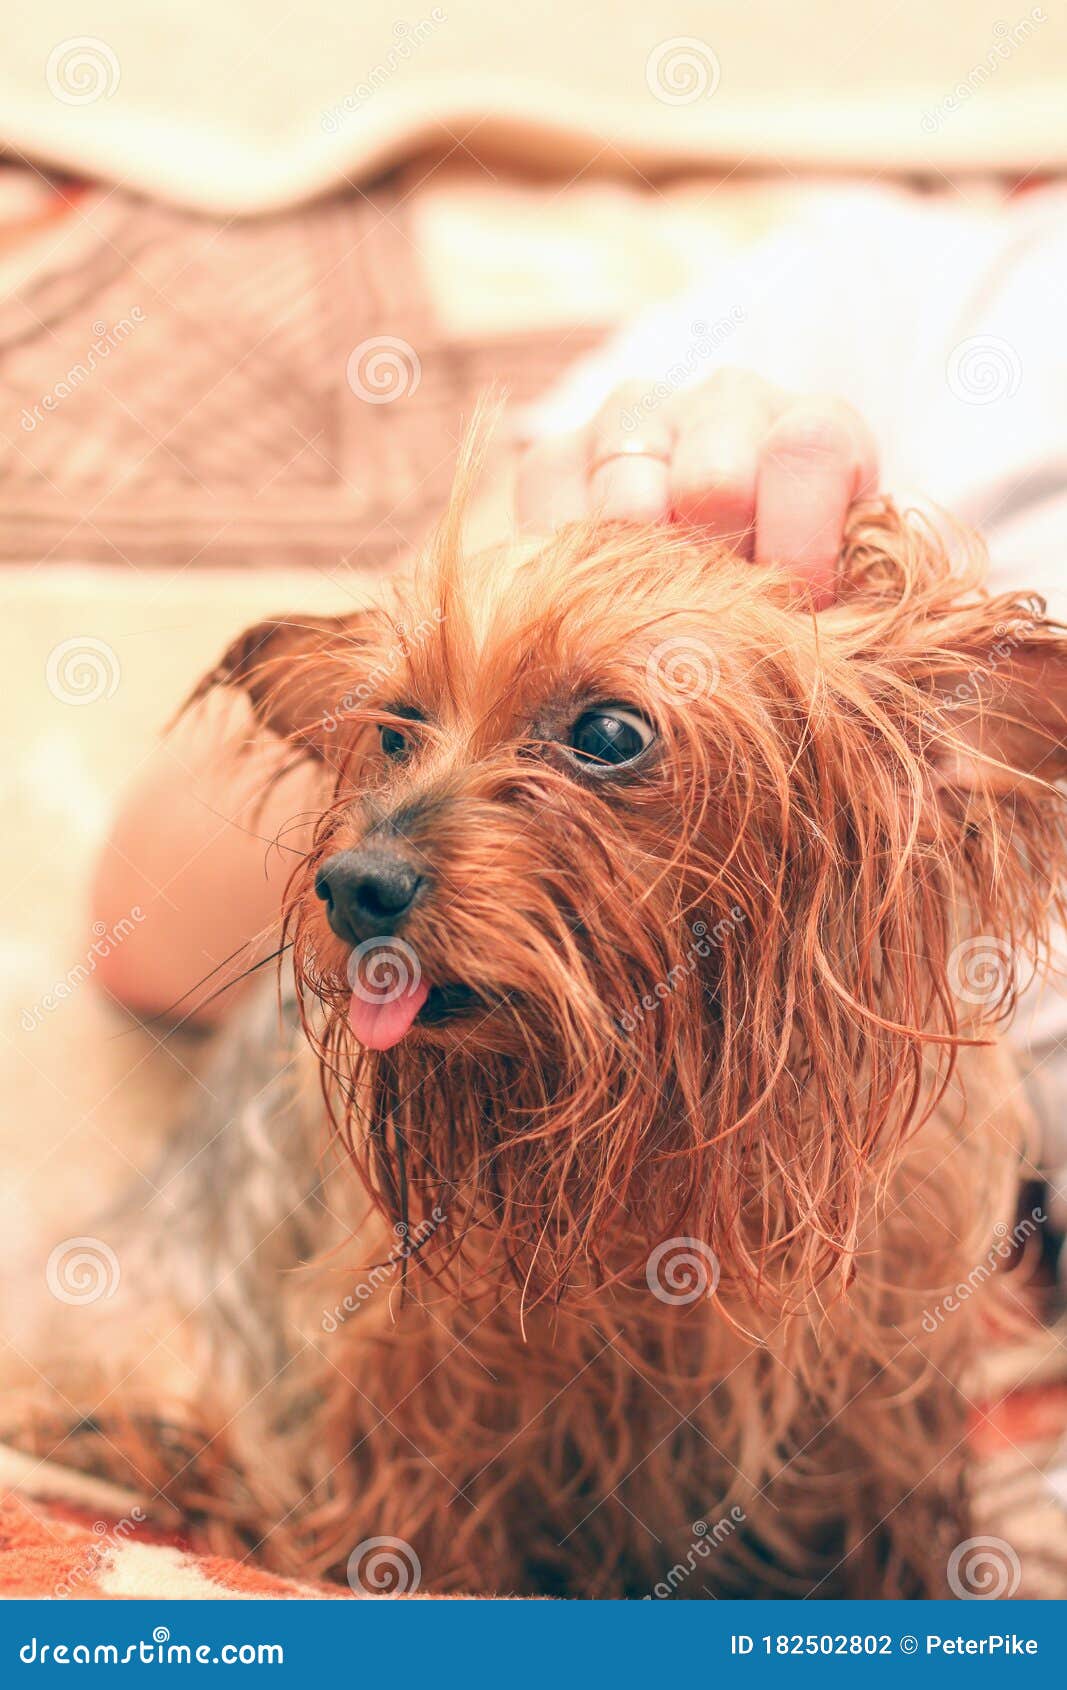 A Wet Yorkshire Terrier with Its Tongue Hanging Out is Sitting Next To ...